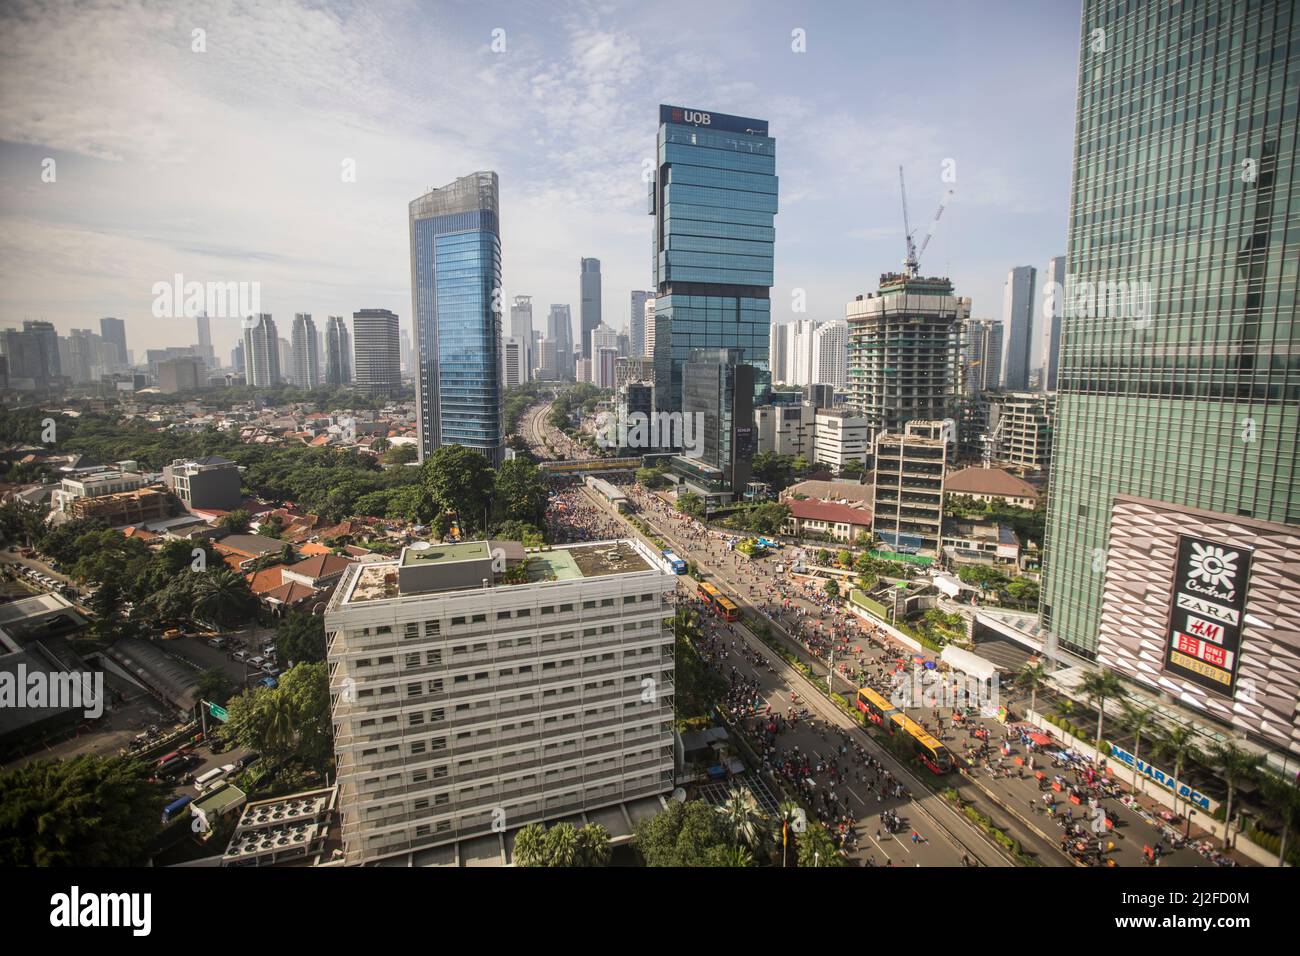 Jakarta, Indonesia’s capital, is the largest and most cosmopolitan city in the country. Menteng, Central Jakarta is shown here. Stock Photo